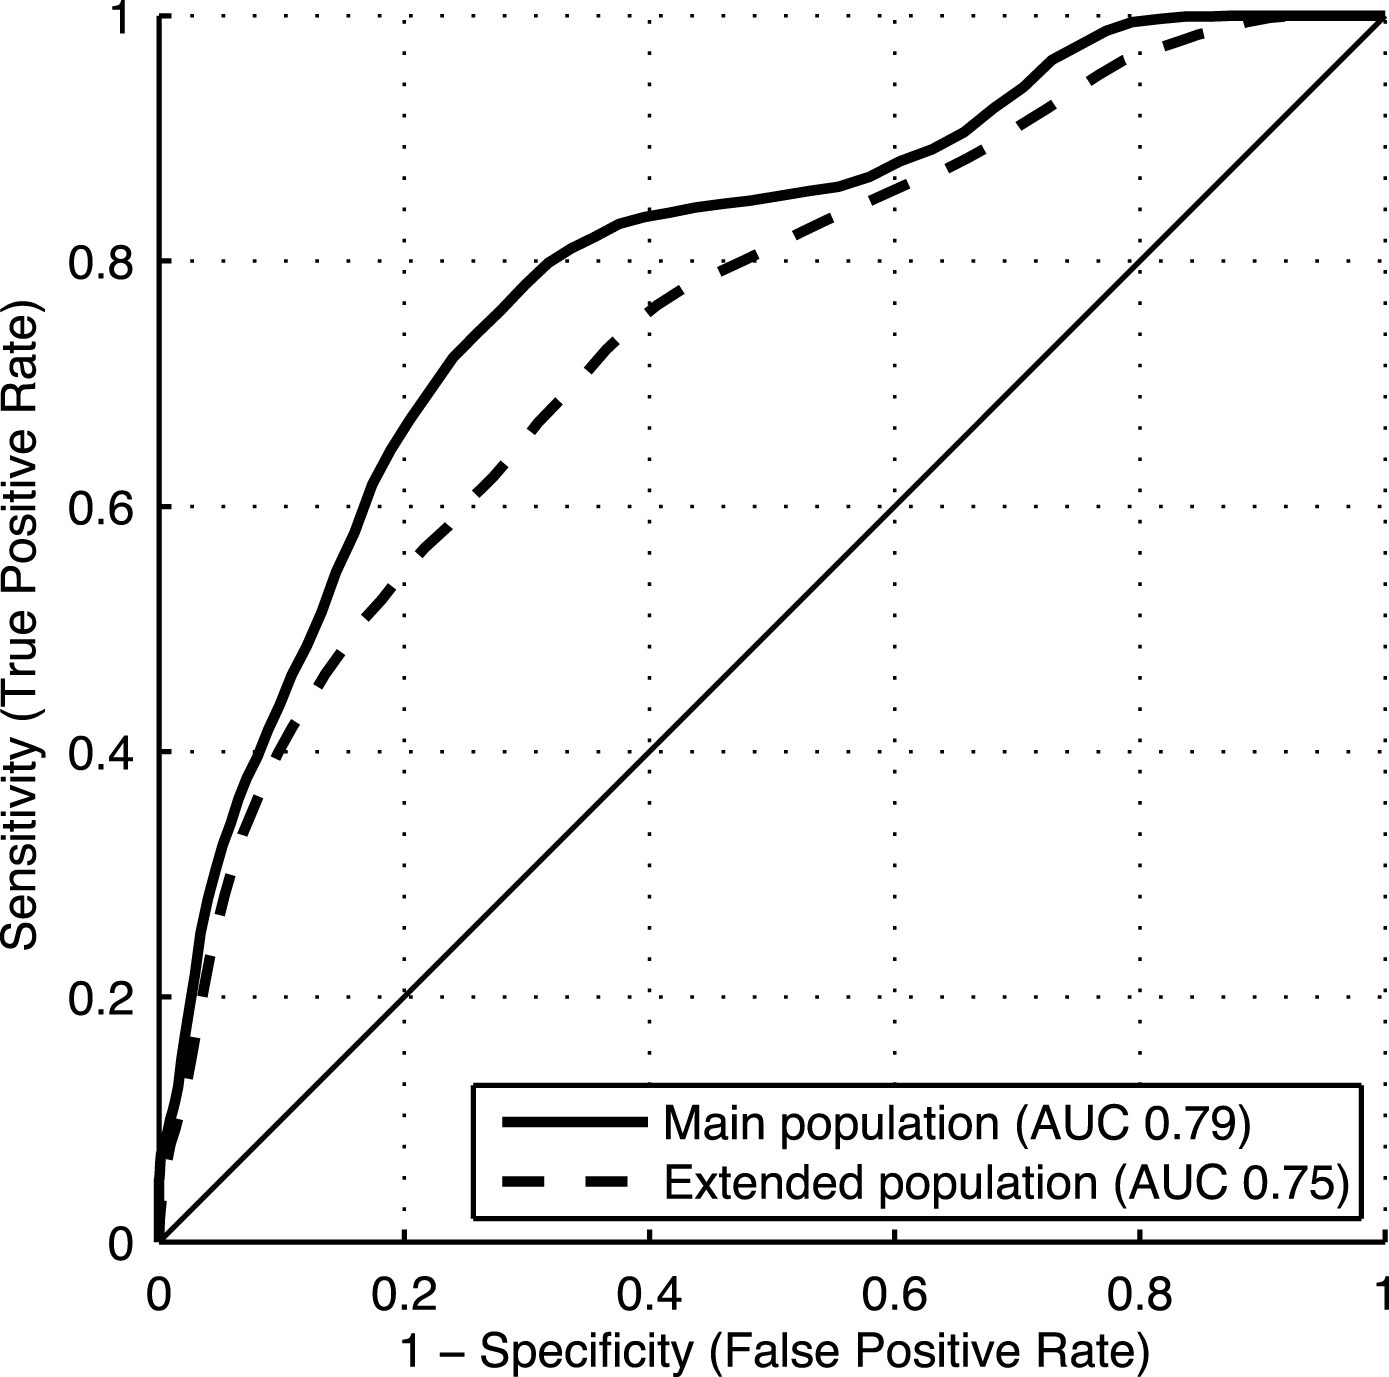 ROC curves for the late-life DSI dementia index in the main and extended study populations.